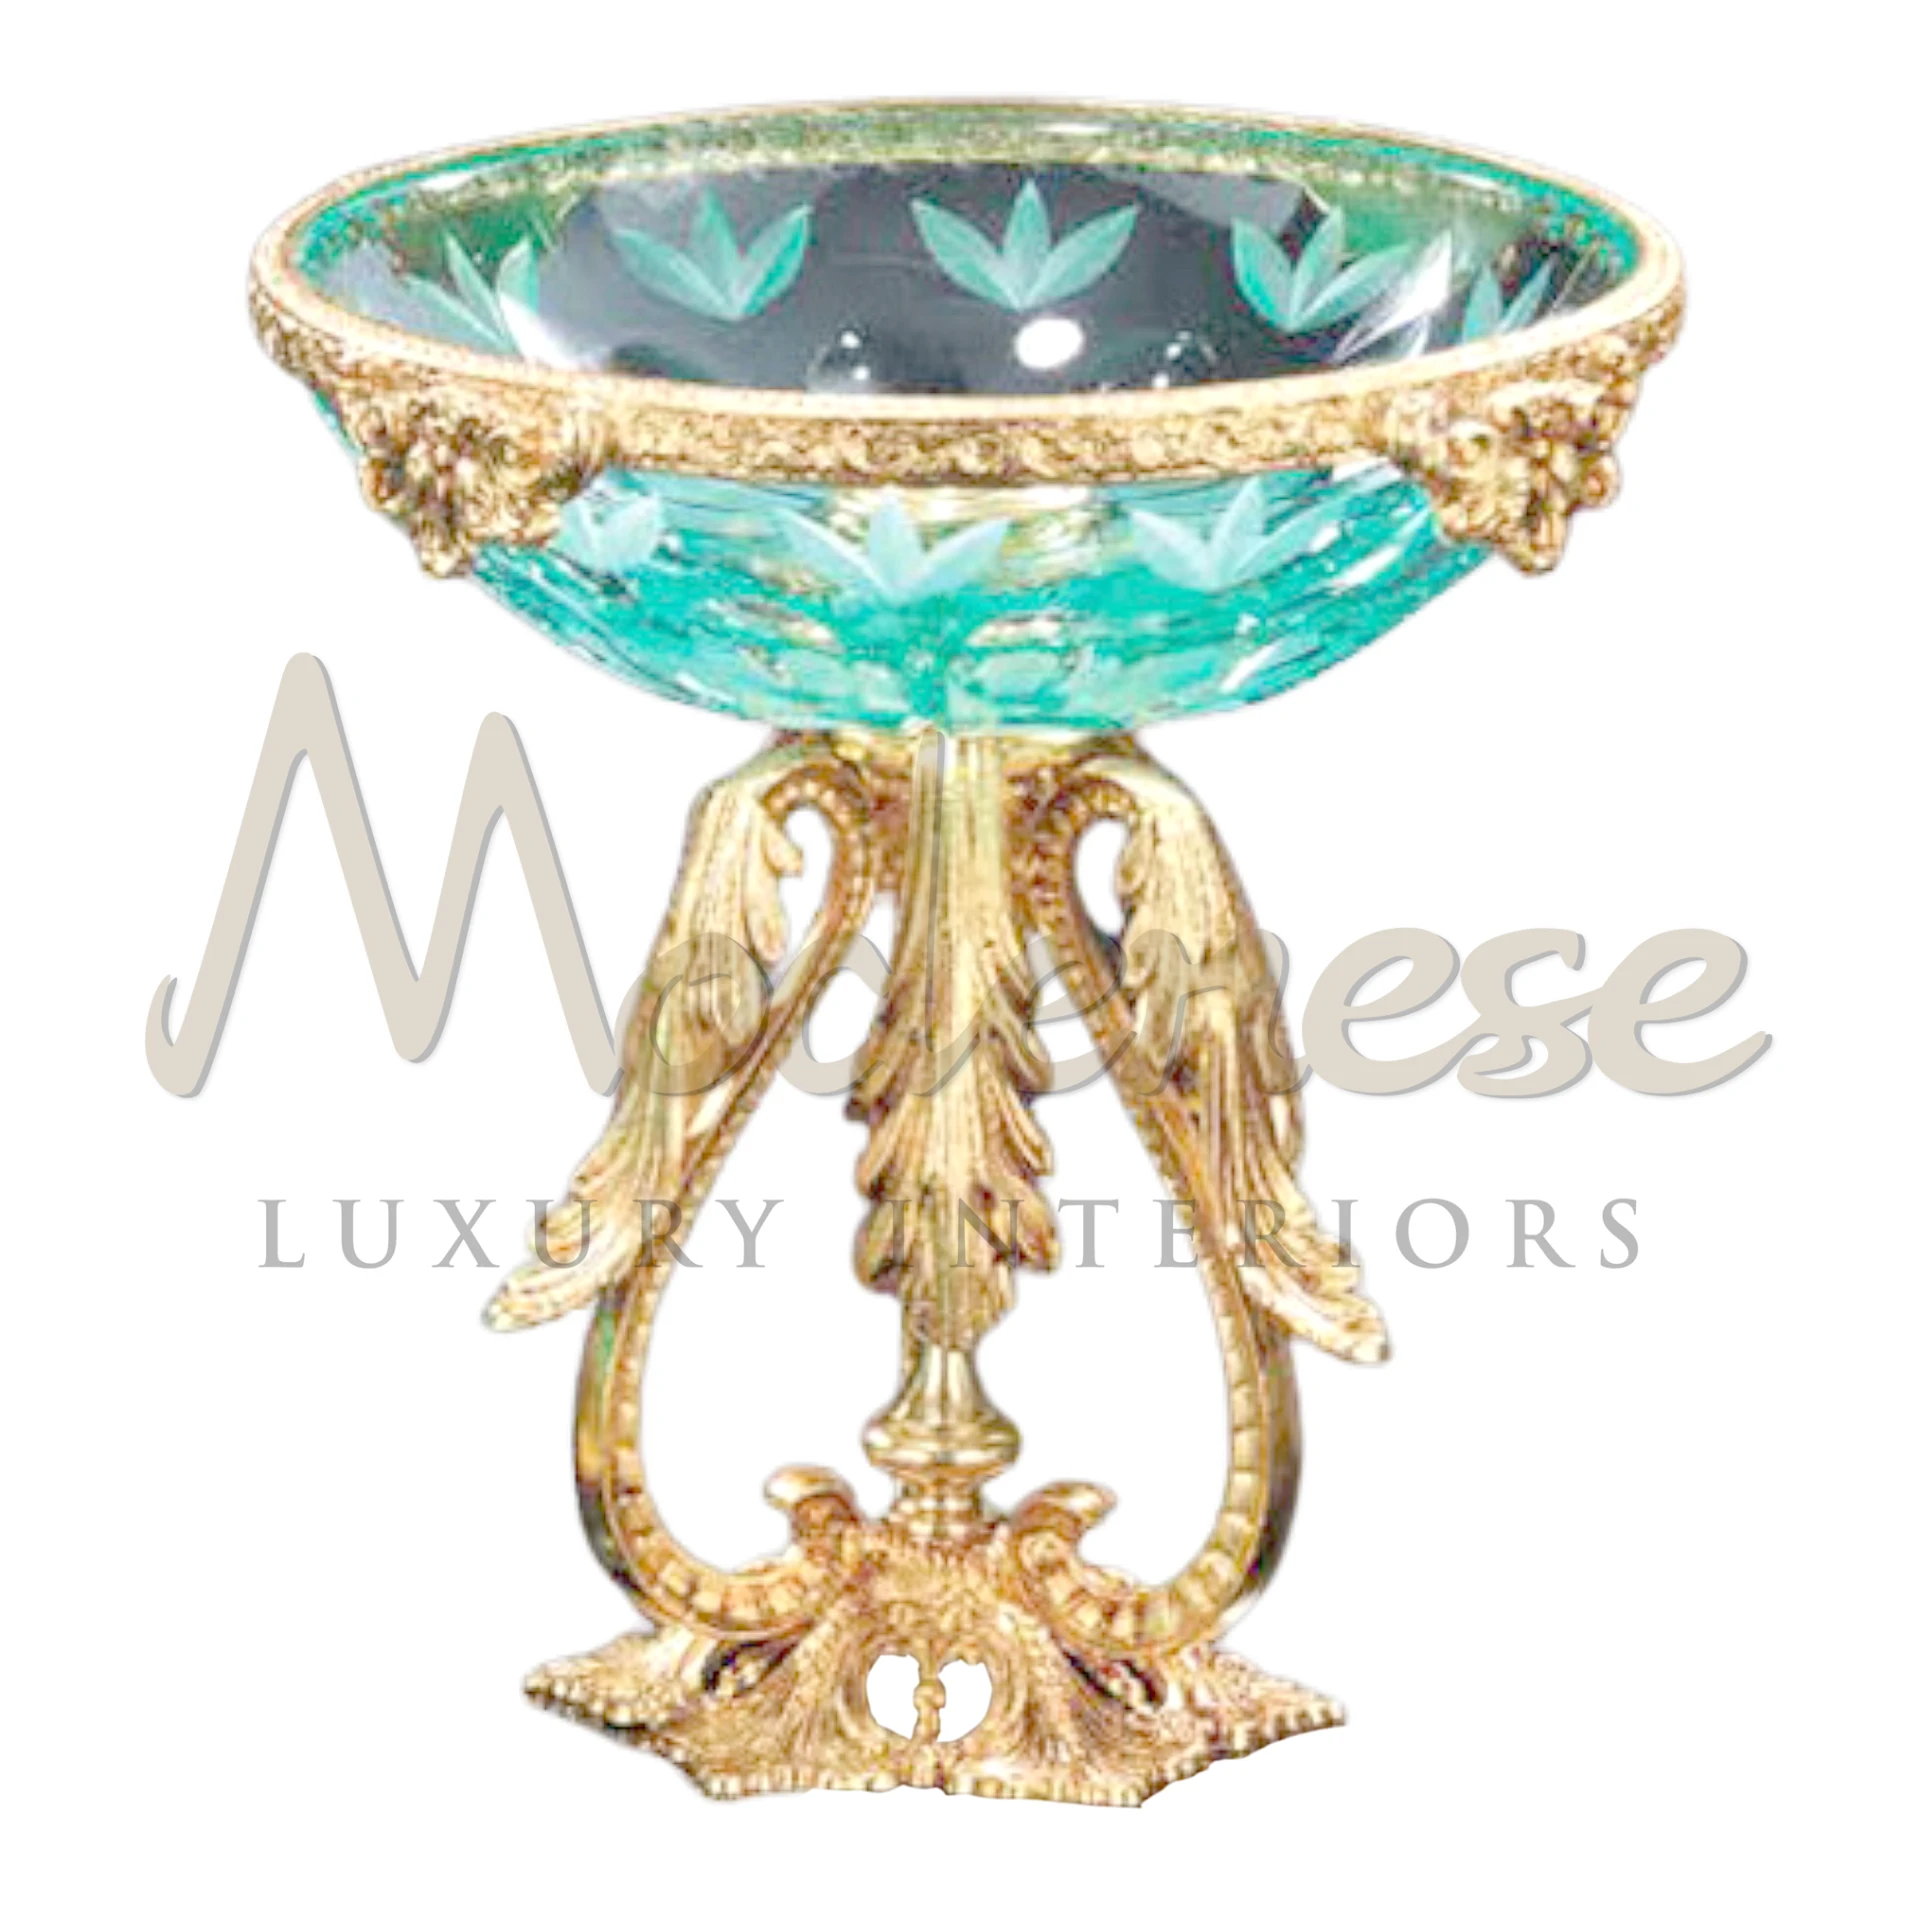 Exquisite Luxury Turquoise Bowl, crafted from fine materials, embodies sophistication in small to large ornate designs for premium luxury interiors.






